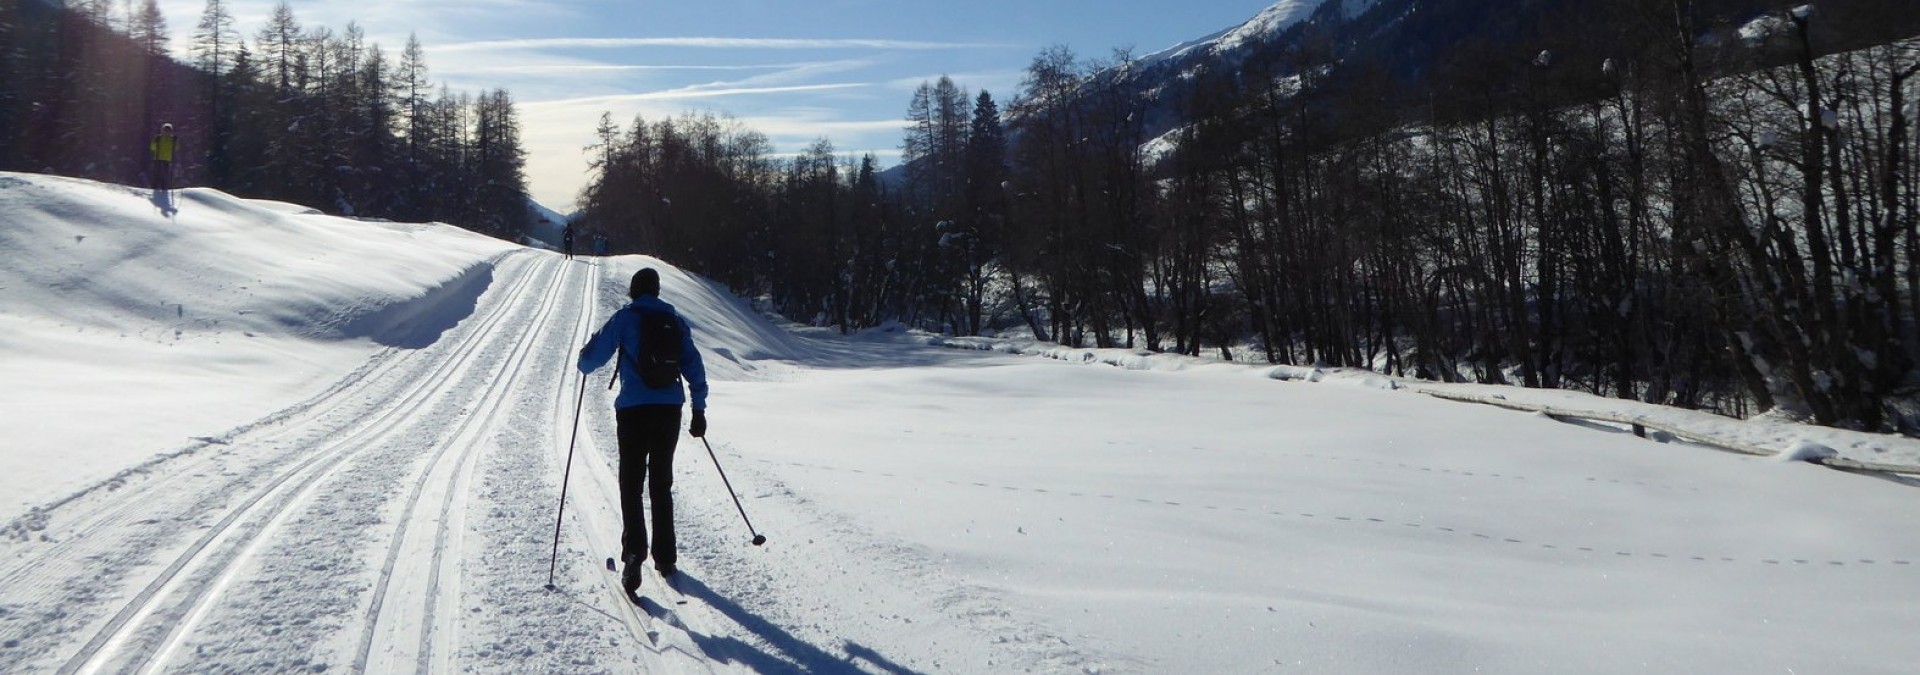 Swiss Alps Cross Country Skiing, Obergoms Valley